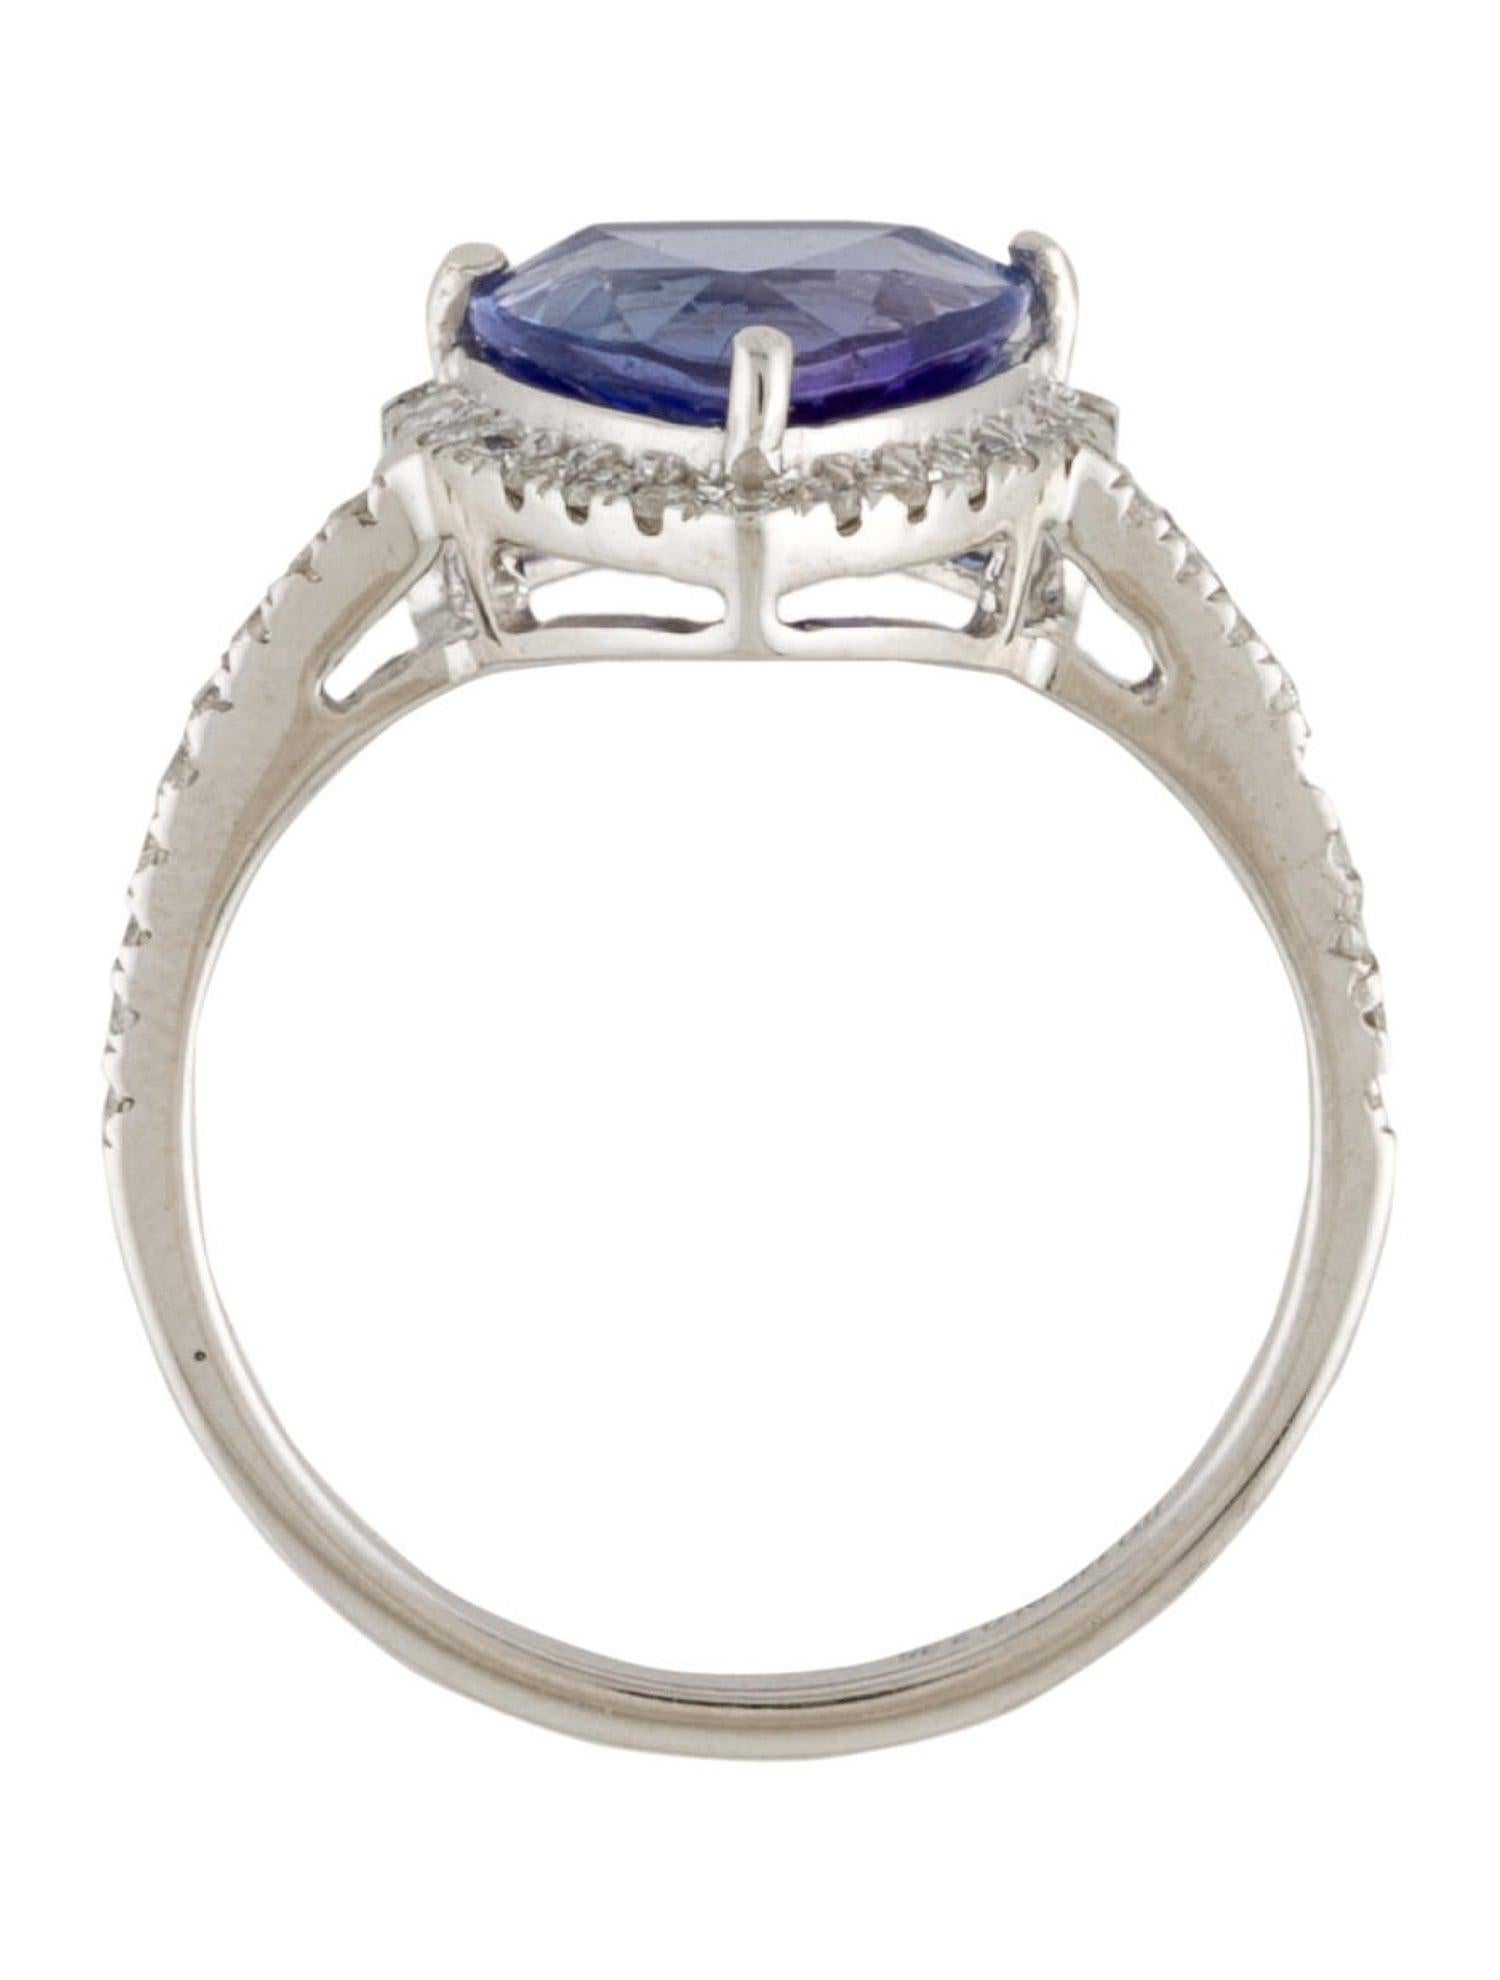 14K White Gold Triangular Tanzanite & Diamond Cocktail Ring, 2.15ct In New Condition For Sale In Holtsville, NY